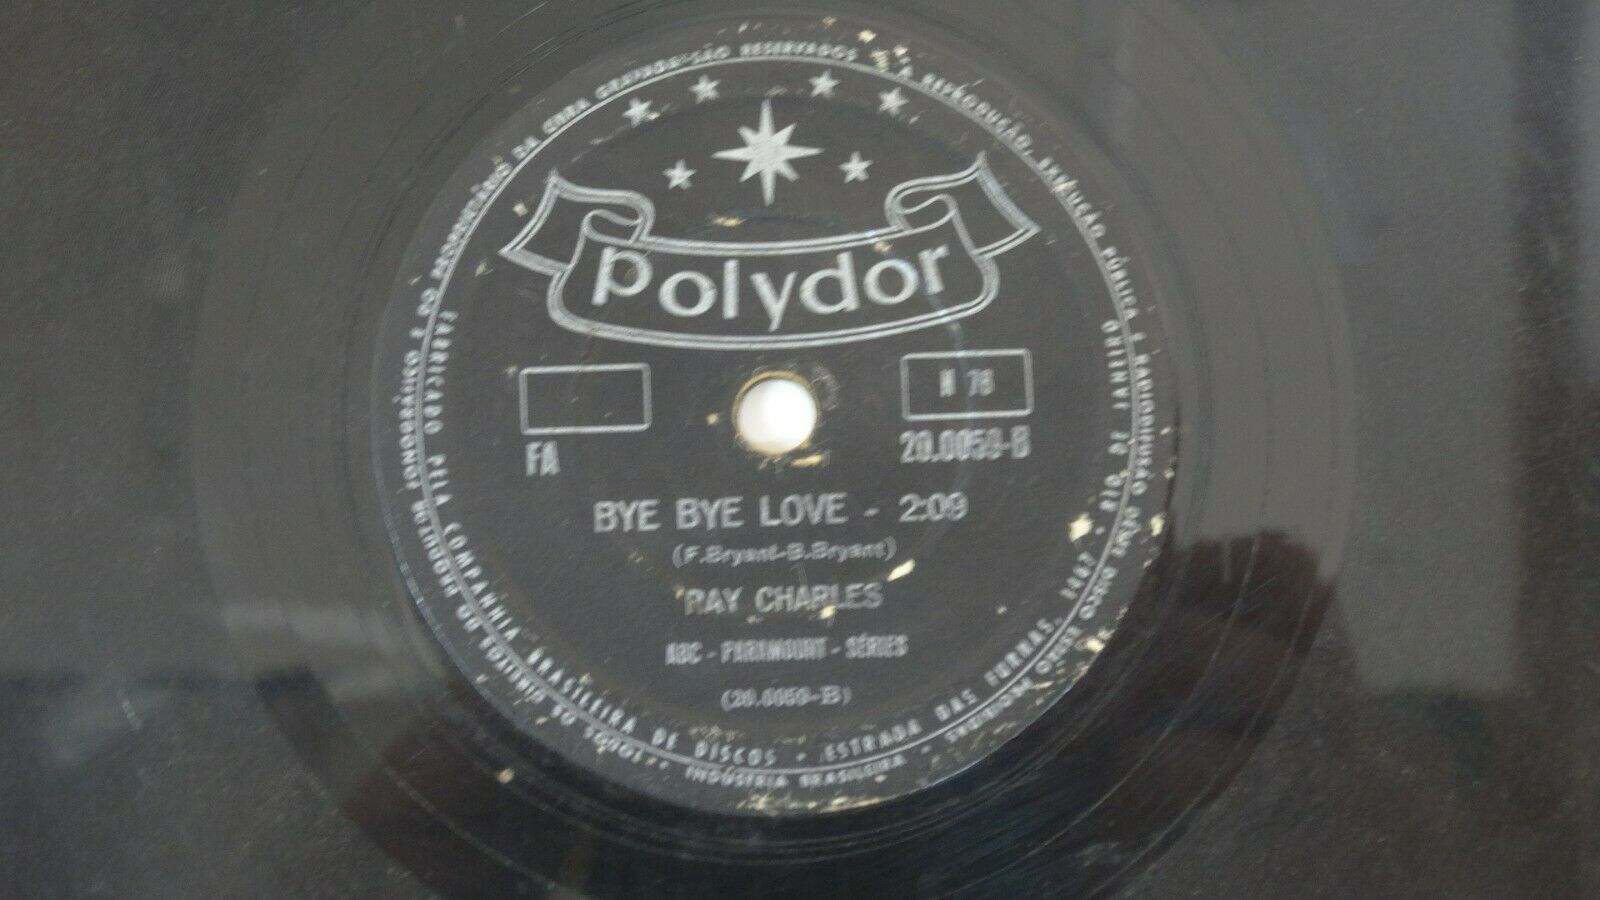 Pic 2 RAY CHARLES - "I Can't Stop Loving You/ Bye Bye Love" 78 RPM BRAZIL 1961